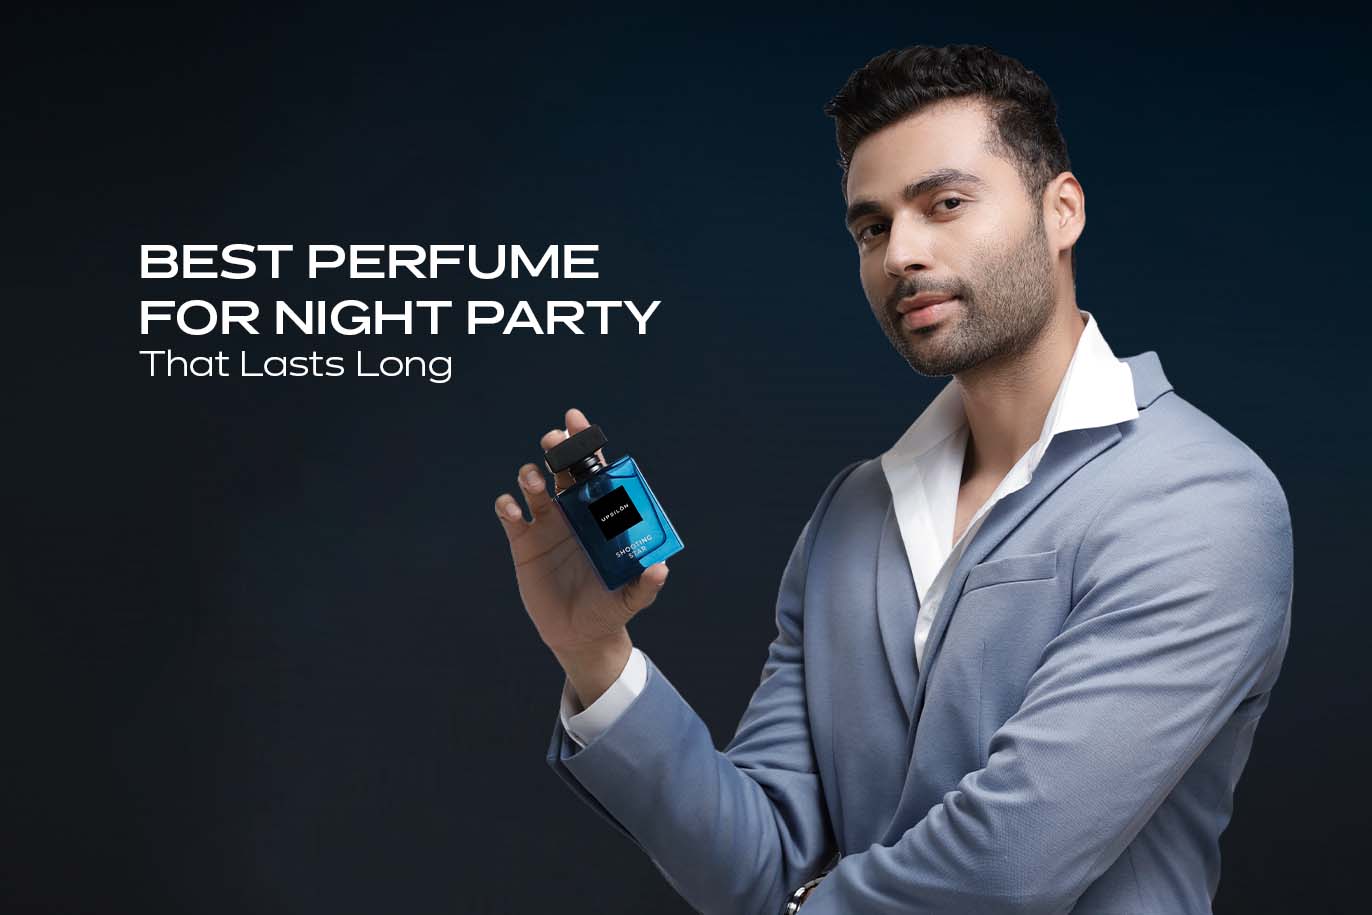 Best Perfume for Night Party that Lasts Long